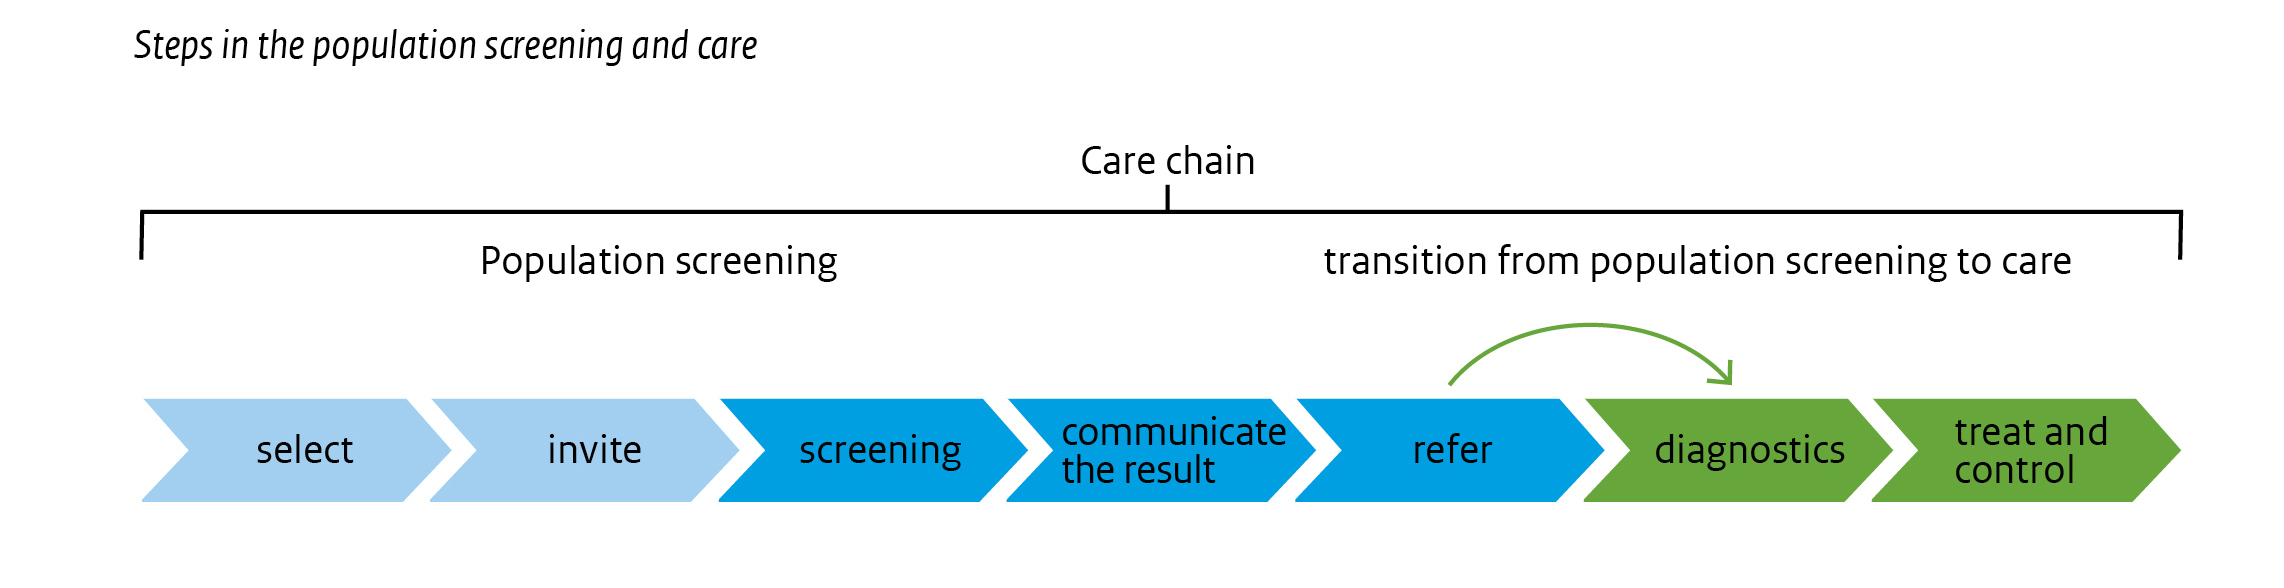 The image Care chain shows the steps in cancer screening and the connecting relation with health care. The selection of the target population, the invitation, screening itself and the communication of the test results are all part of the screening. The diagnostics, treatment and control process are part of the health care.